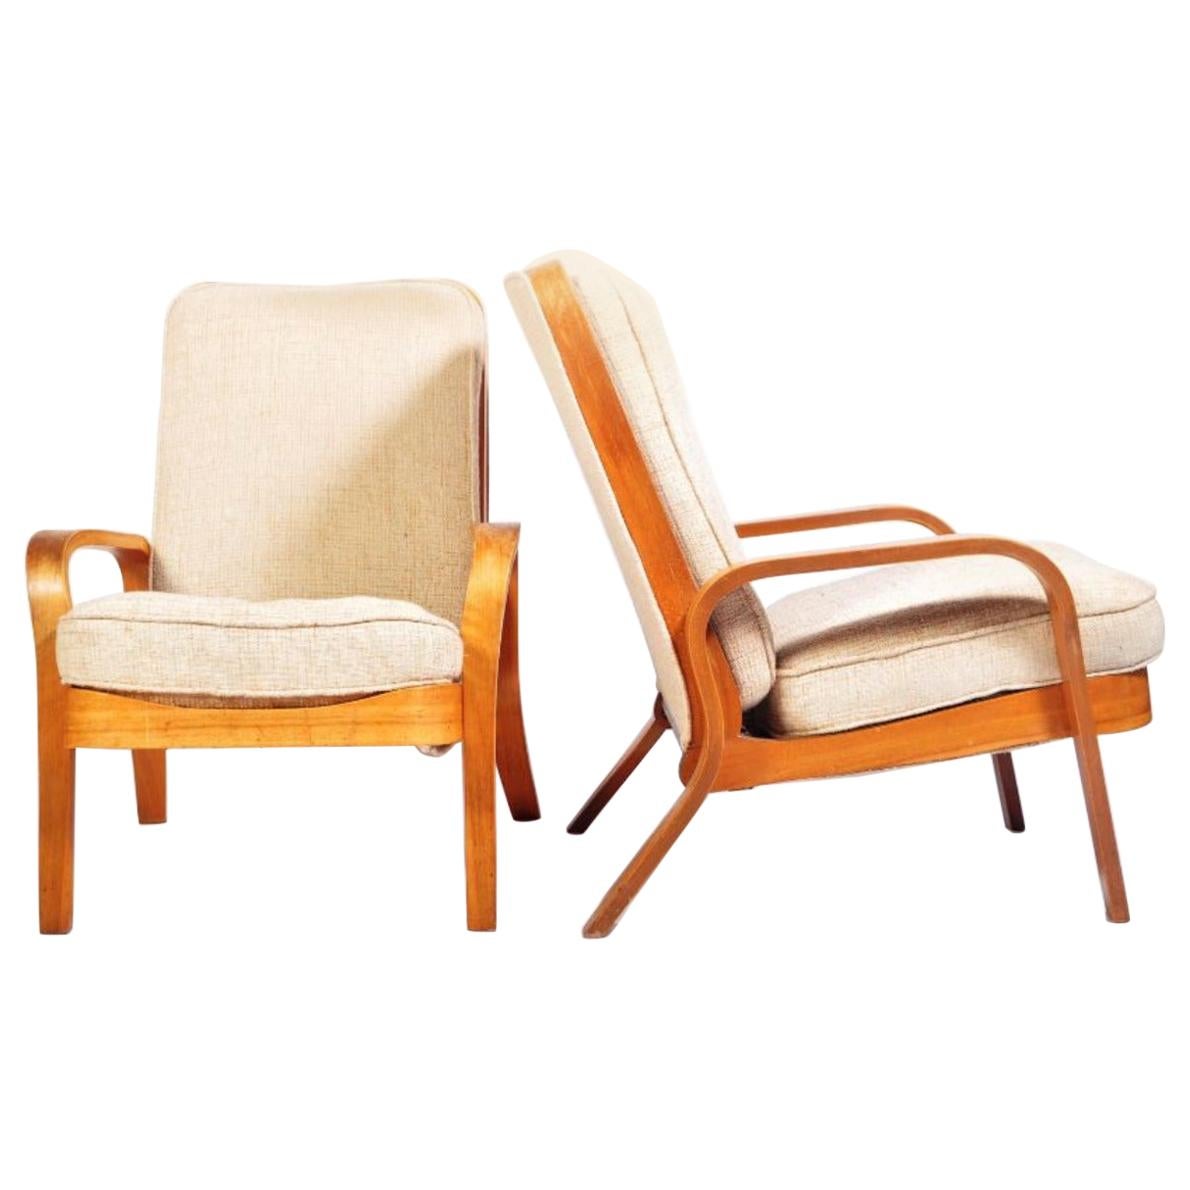 Pair of Chairs for the Modern Home